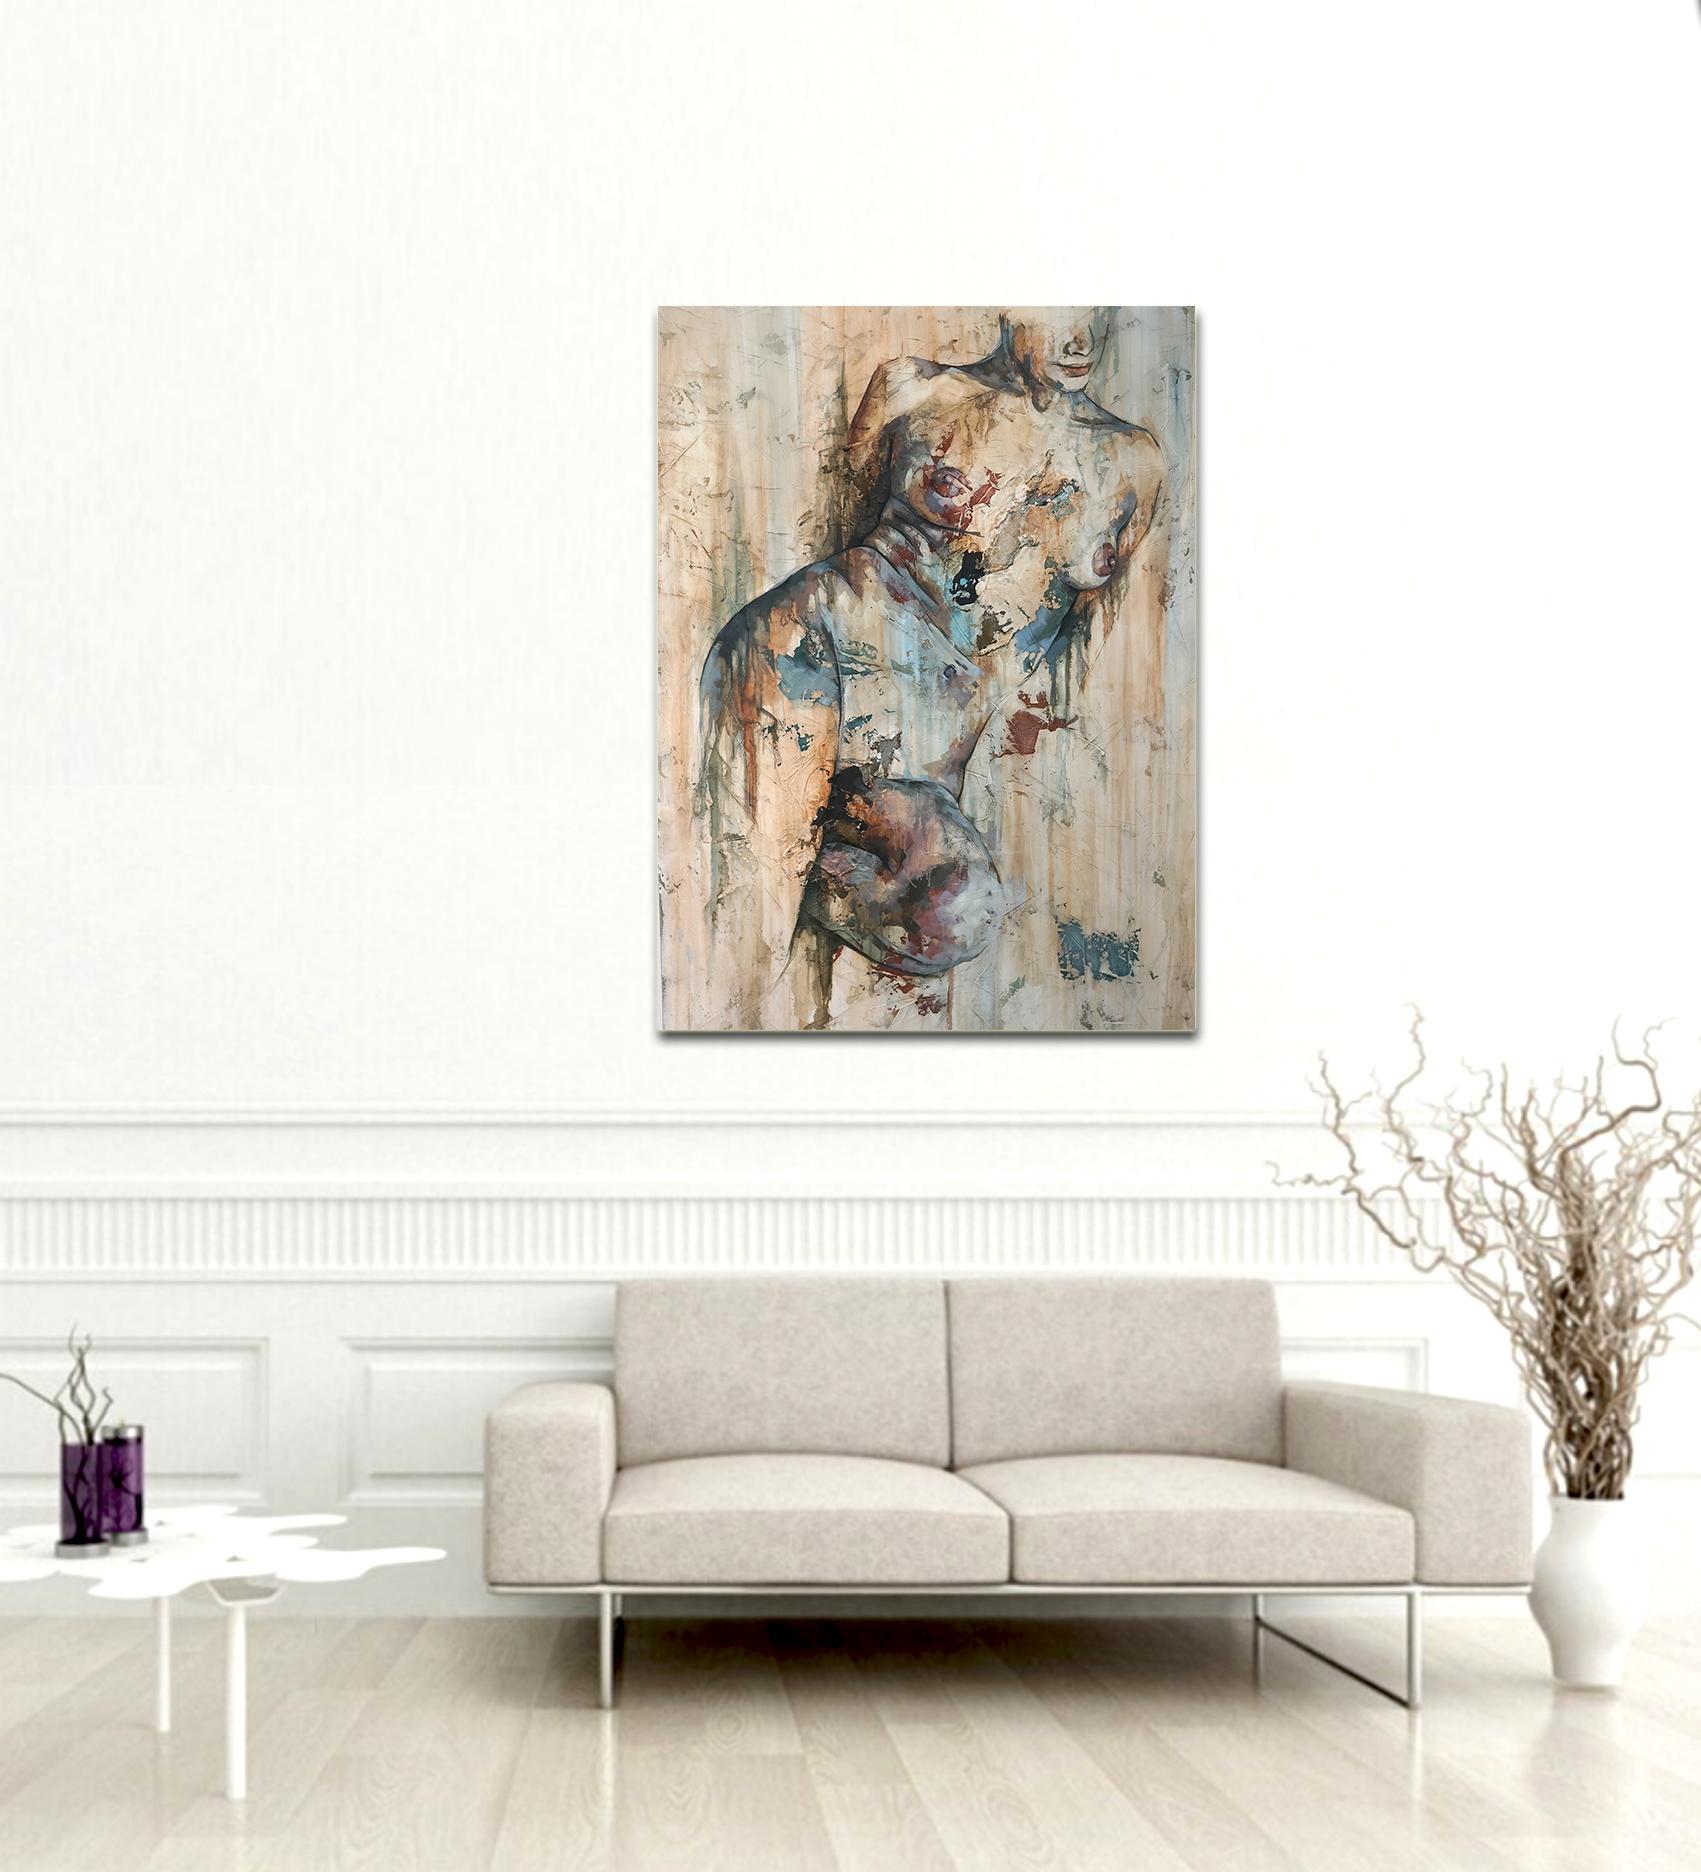 Traces by Francisco Jimenez - Modern, Abstract Painting of Nude Figurative Woman - Brown Figurative Painting by Francisco Jose Jimenez